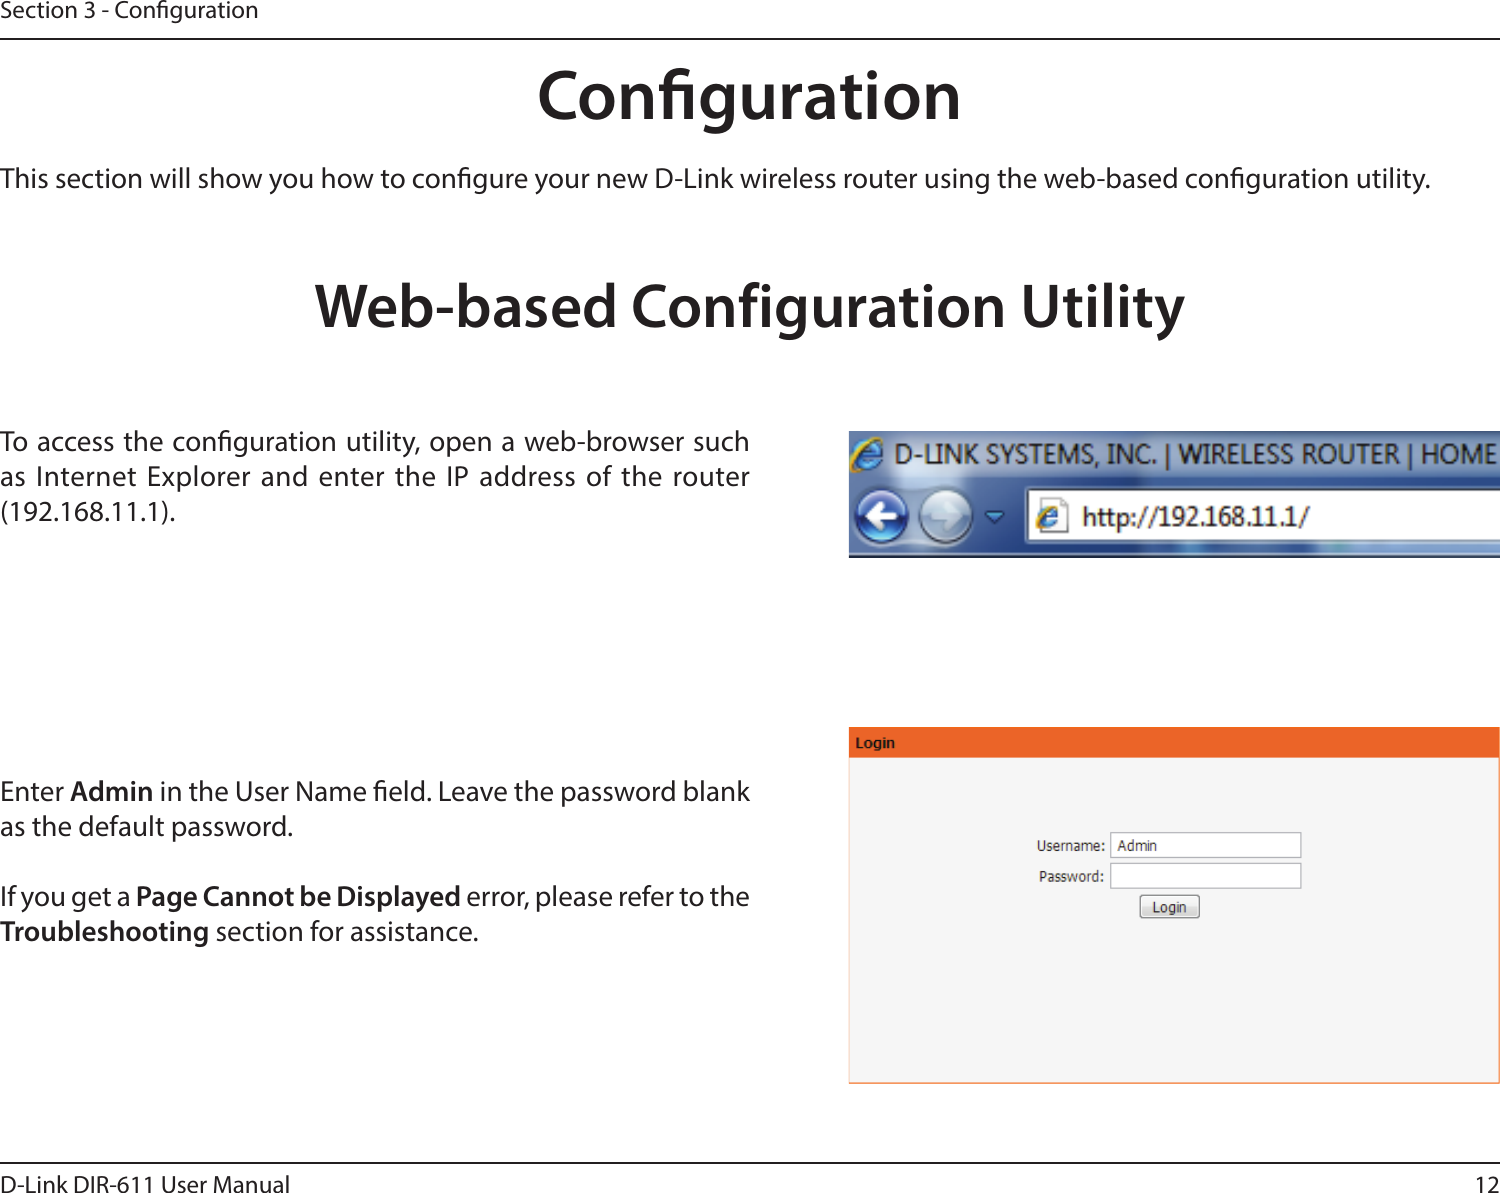 12D-Link DIR-611 User ManualSection 3 - CongurationCongurationThis section will show you how to congure your new D-Link wireless router using the web-based conguration utility.Web-based Configuration UtilityTo access the conguration utility, open a web-browser such as Internet Explorer and enter the IP address of the router (192.168.11.1).Enter Admin in the User Name eld. Leave the password blank as the default password. If you get a Page Cannot be Displayed error, please refer to the Troubleshooting section for assistance.